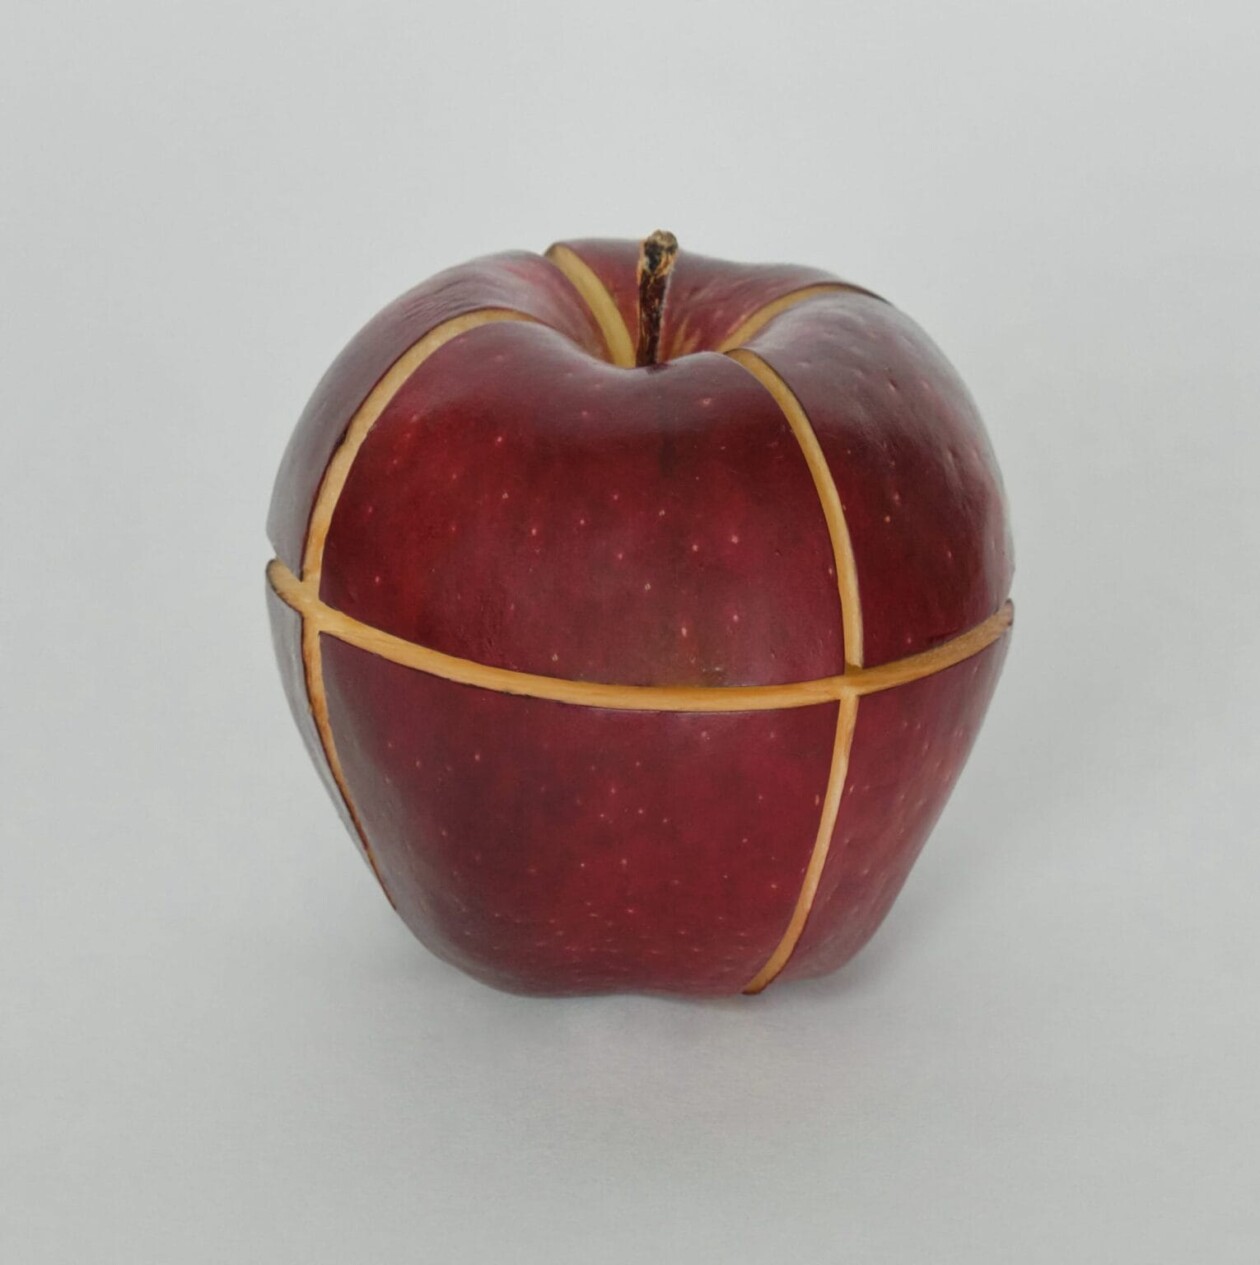 Smart And Playful Sculptures Carved Out Of Apples By Chinese Artist Can Sun (5)